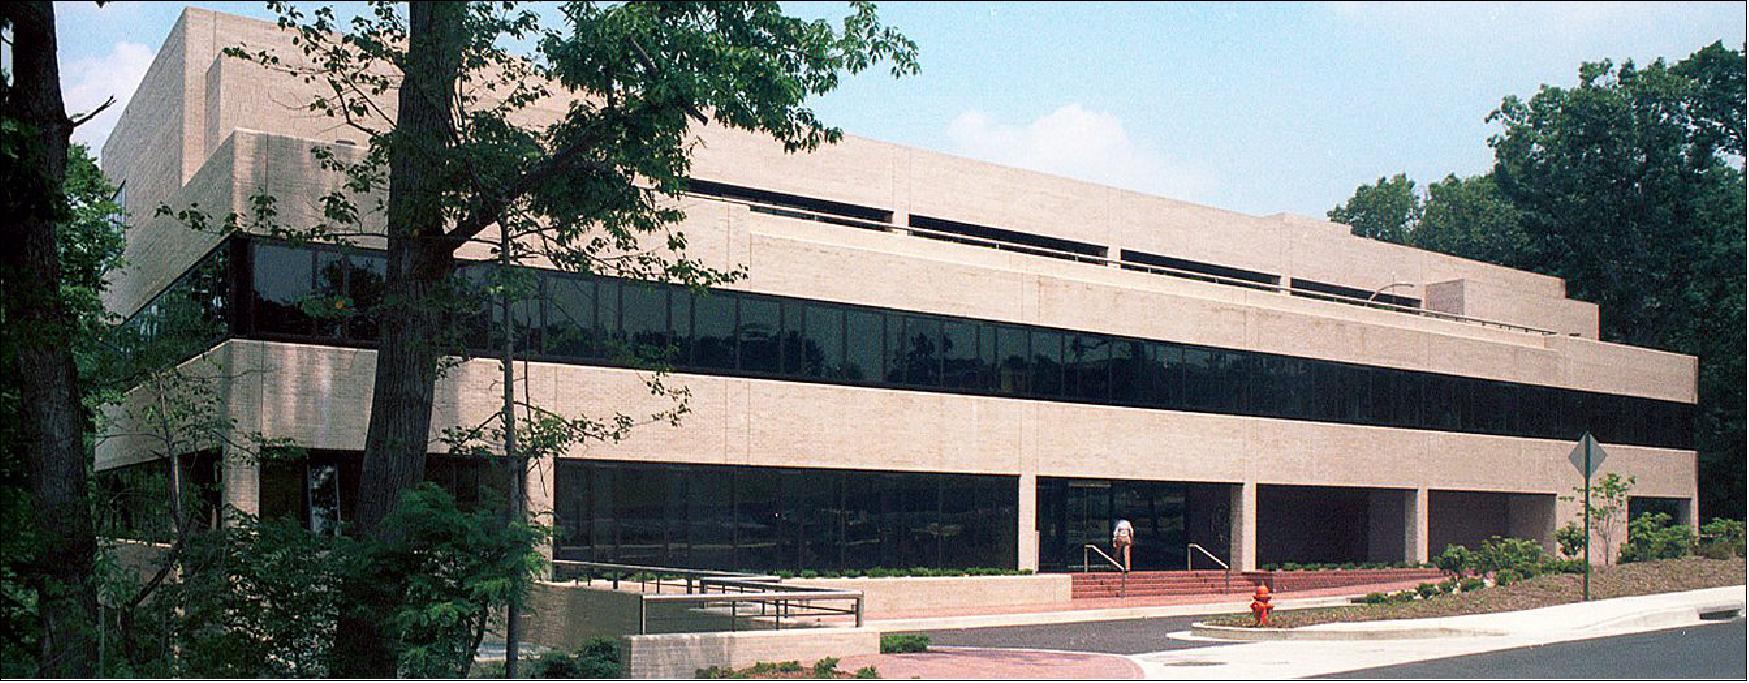 Figure 97: The STScI (Space Telescope Science Institute) is headquartered in the Muller building on the Johns Hopkins University's Homewood campus. This photo shows the original building shortly after its completion in 1983 (image credit: STScI)